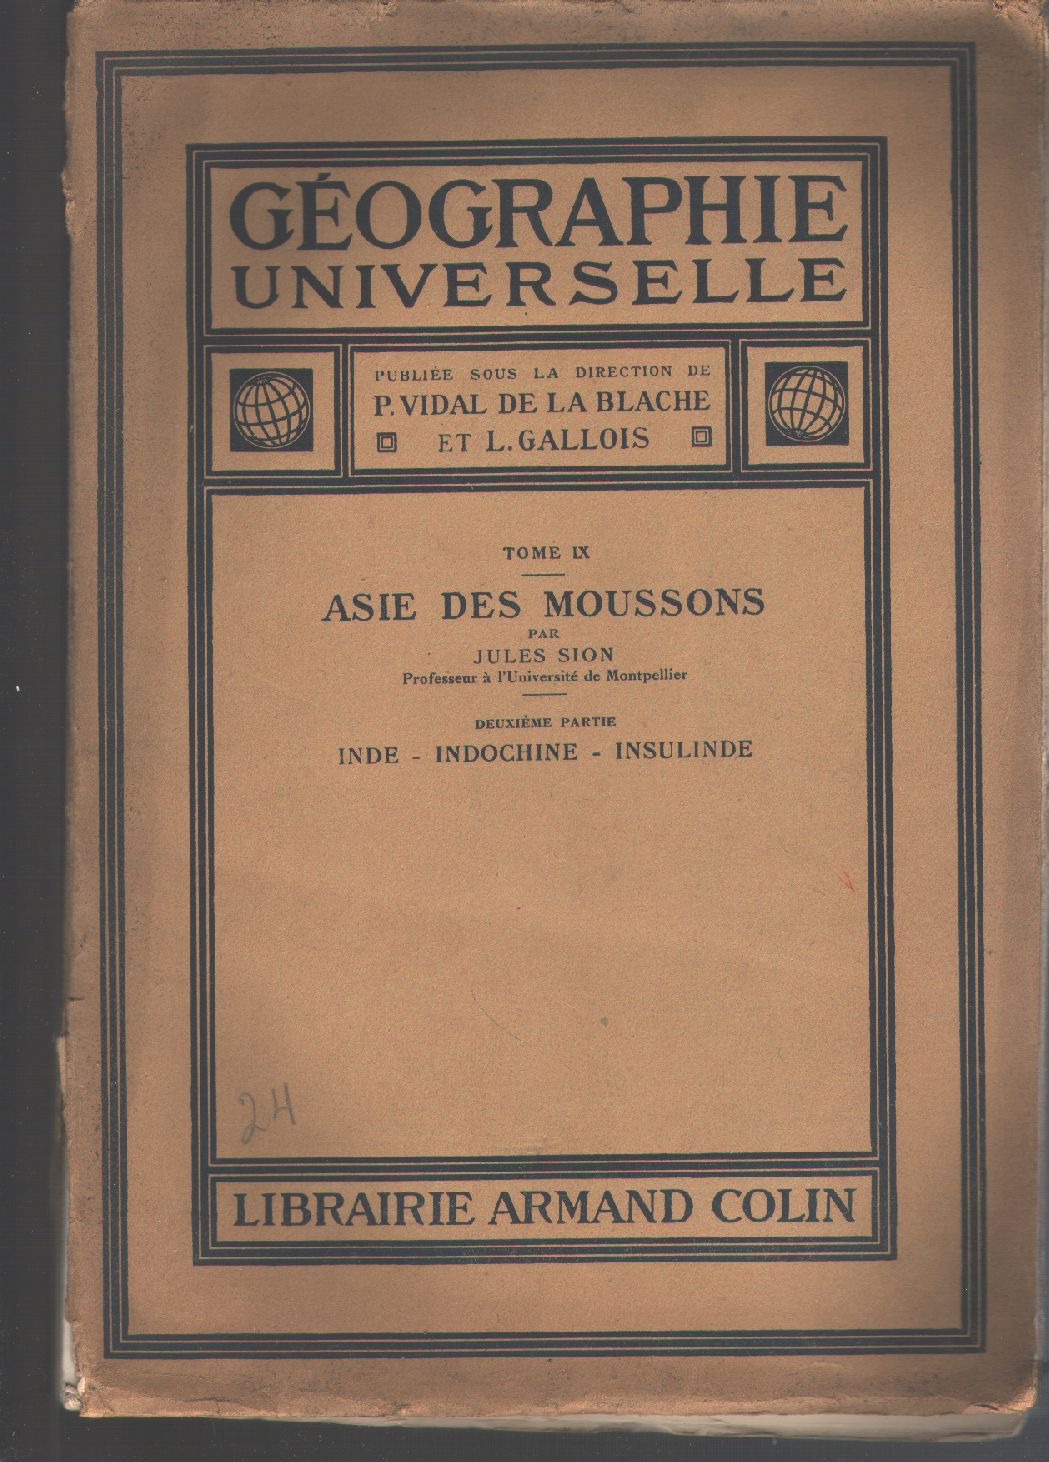 J. Sion  Inde - Indochine - Insulinde  Asie des Moussons Geographie Universelle 